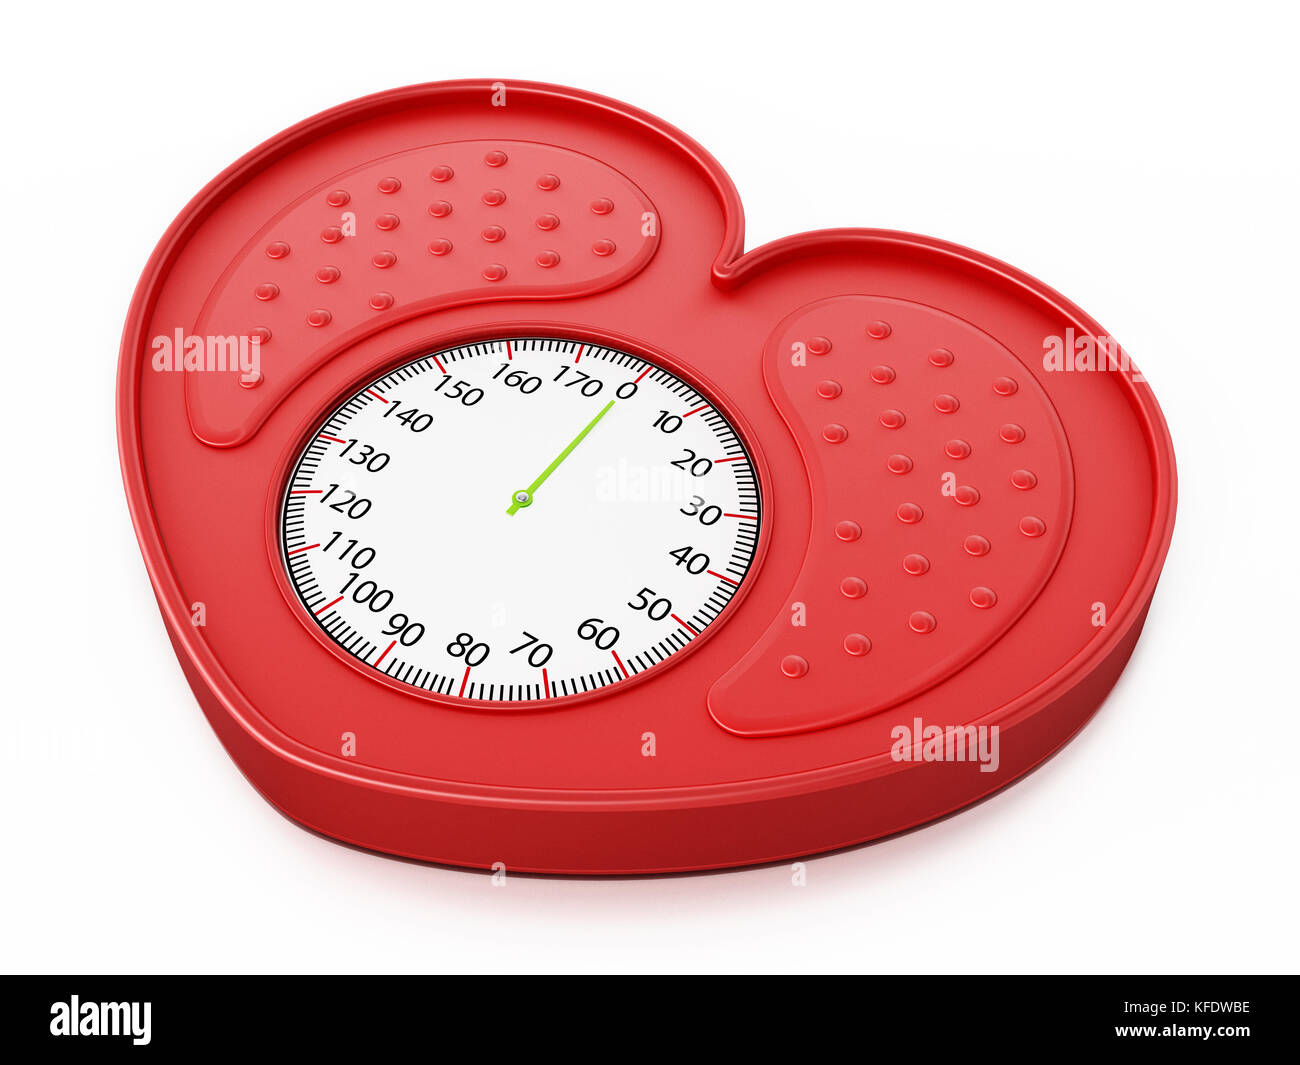 Heart shaped red bathroom scale. 3D illustration. Stock Photo